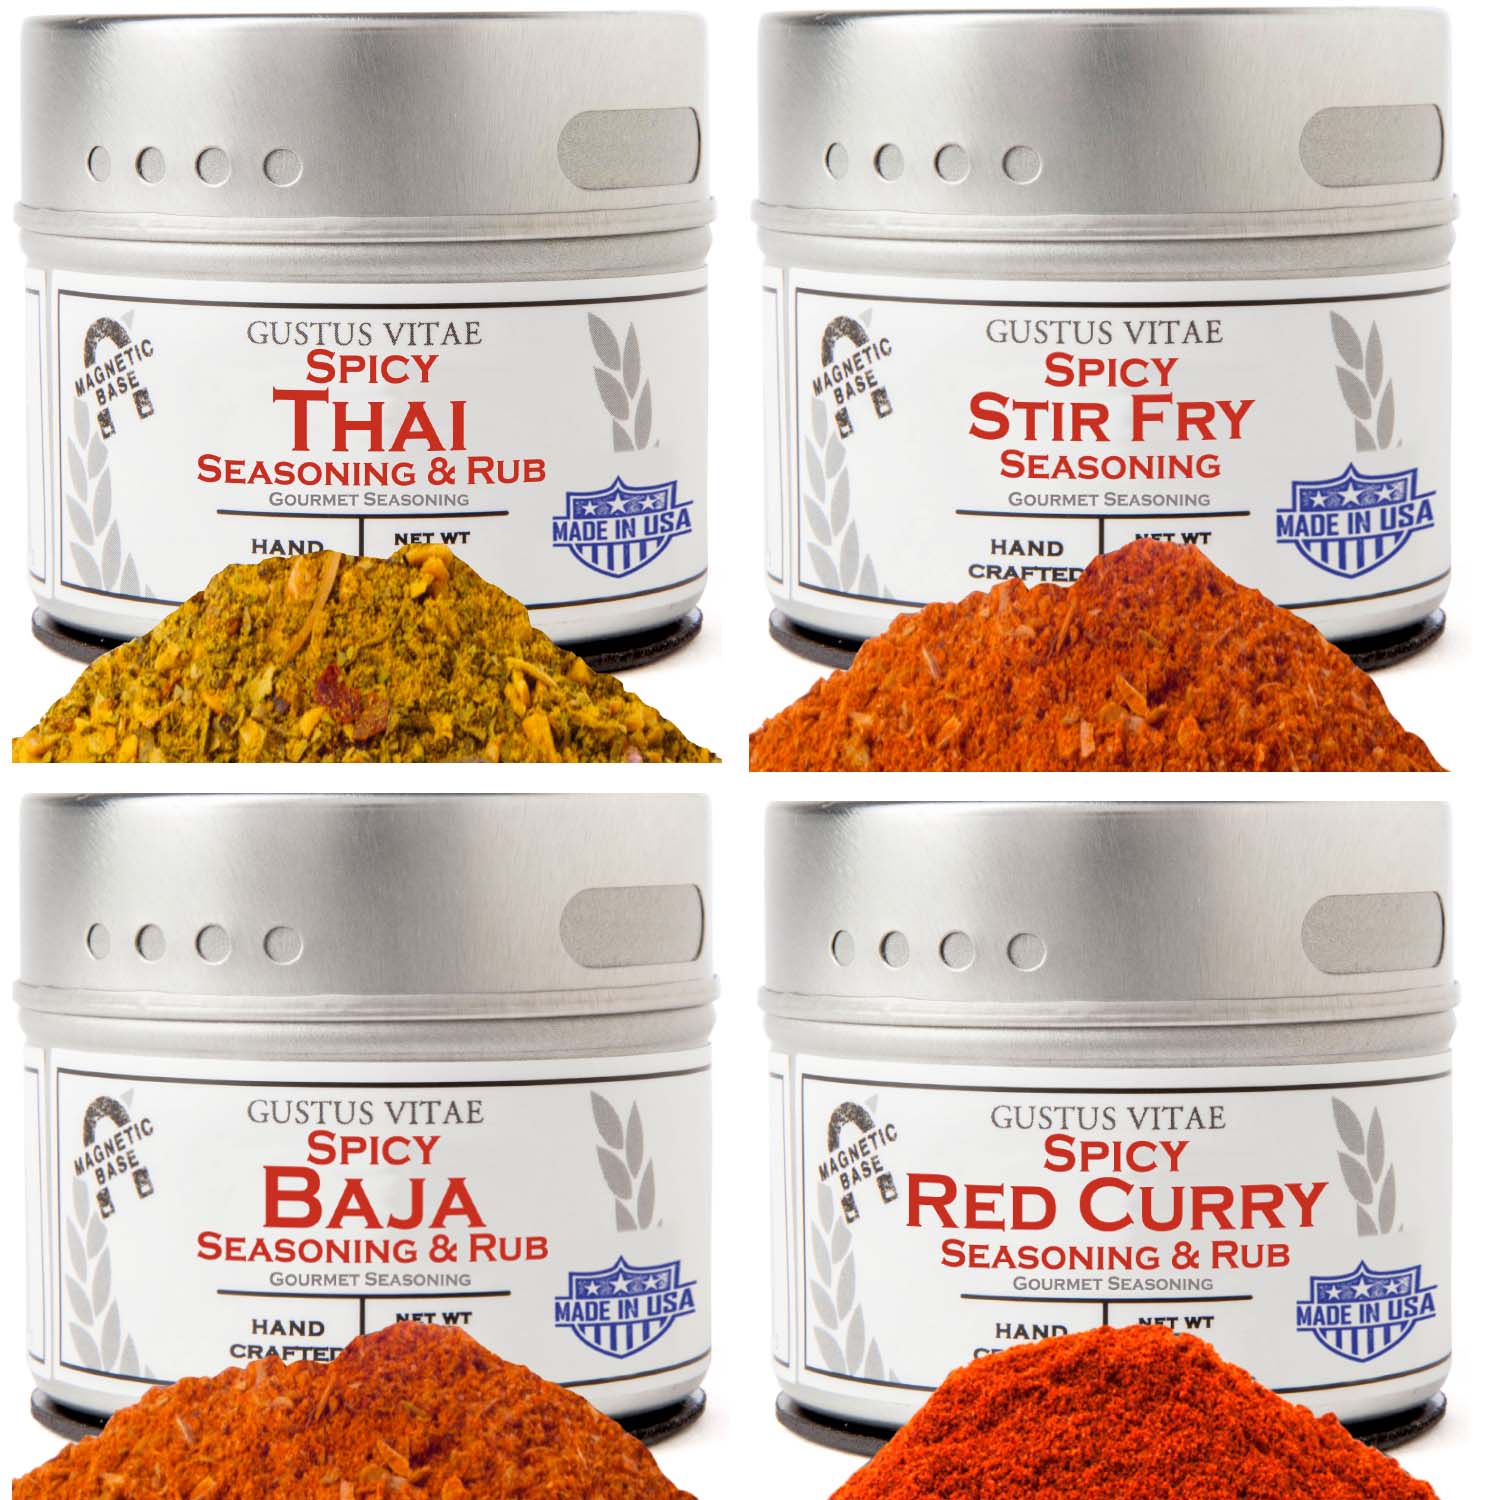 Spicy One Pot Wonders Complete Seasonings and Spice Blends Collection